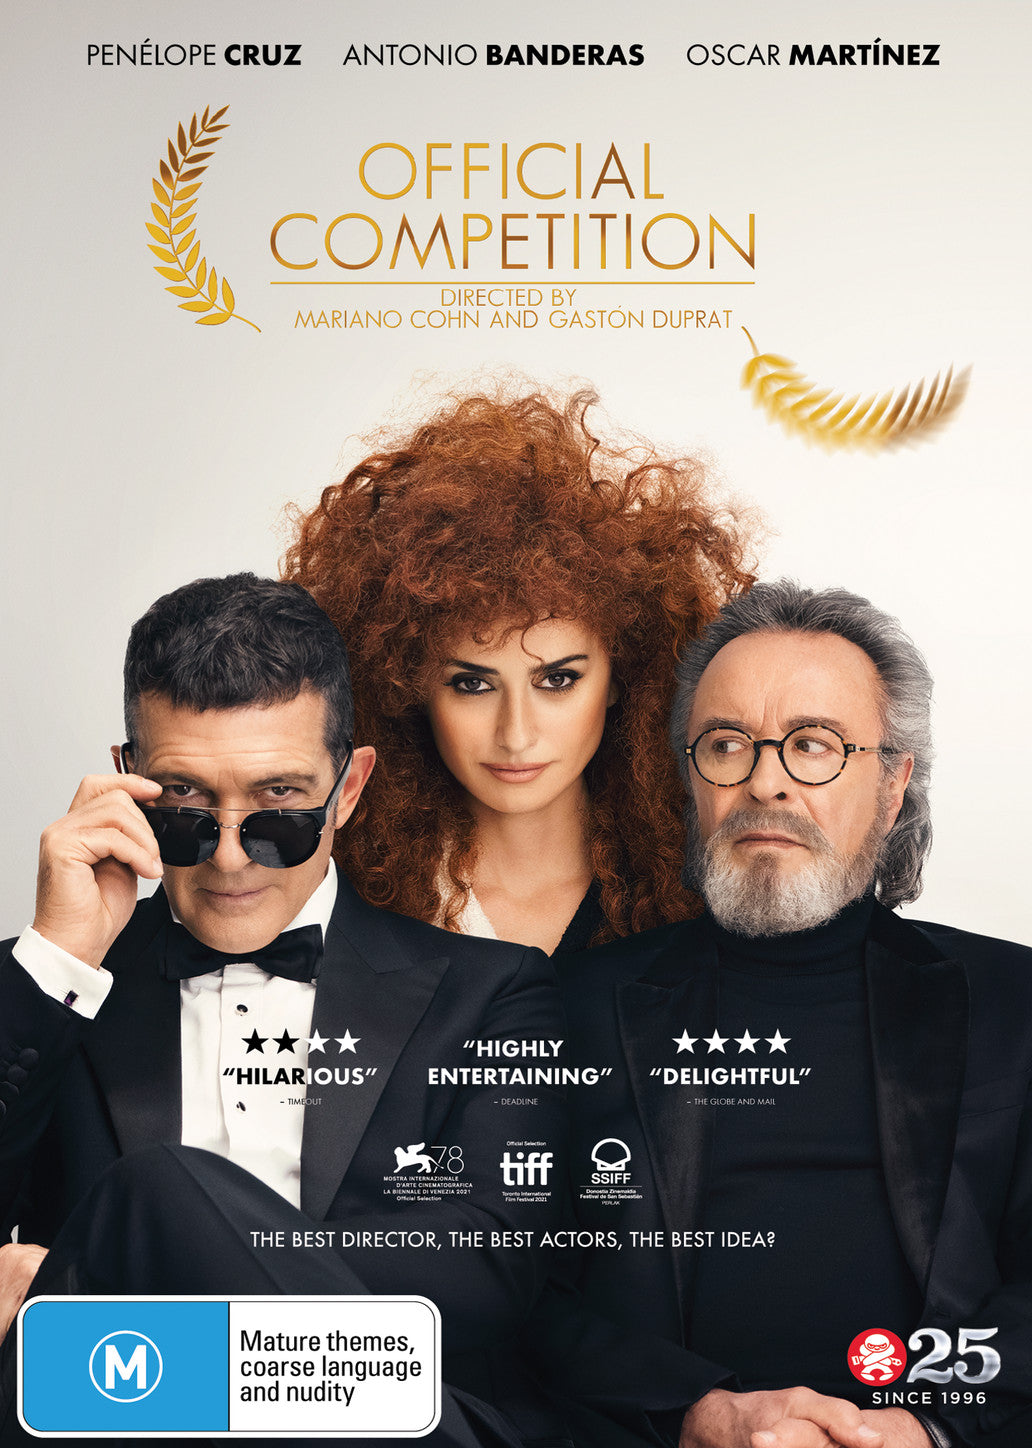 OFFICIAL COMPETITION